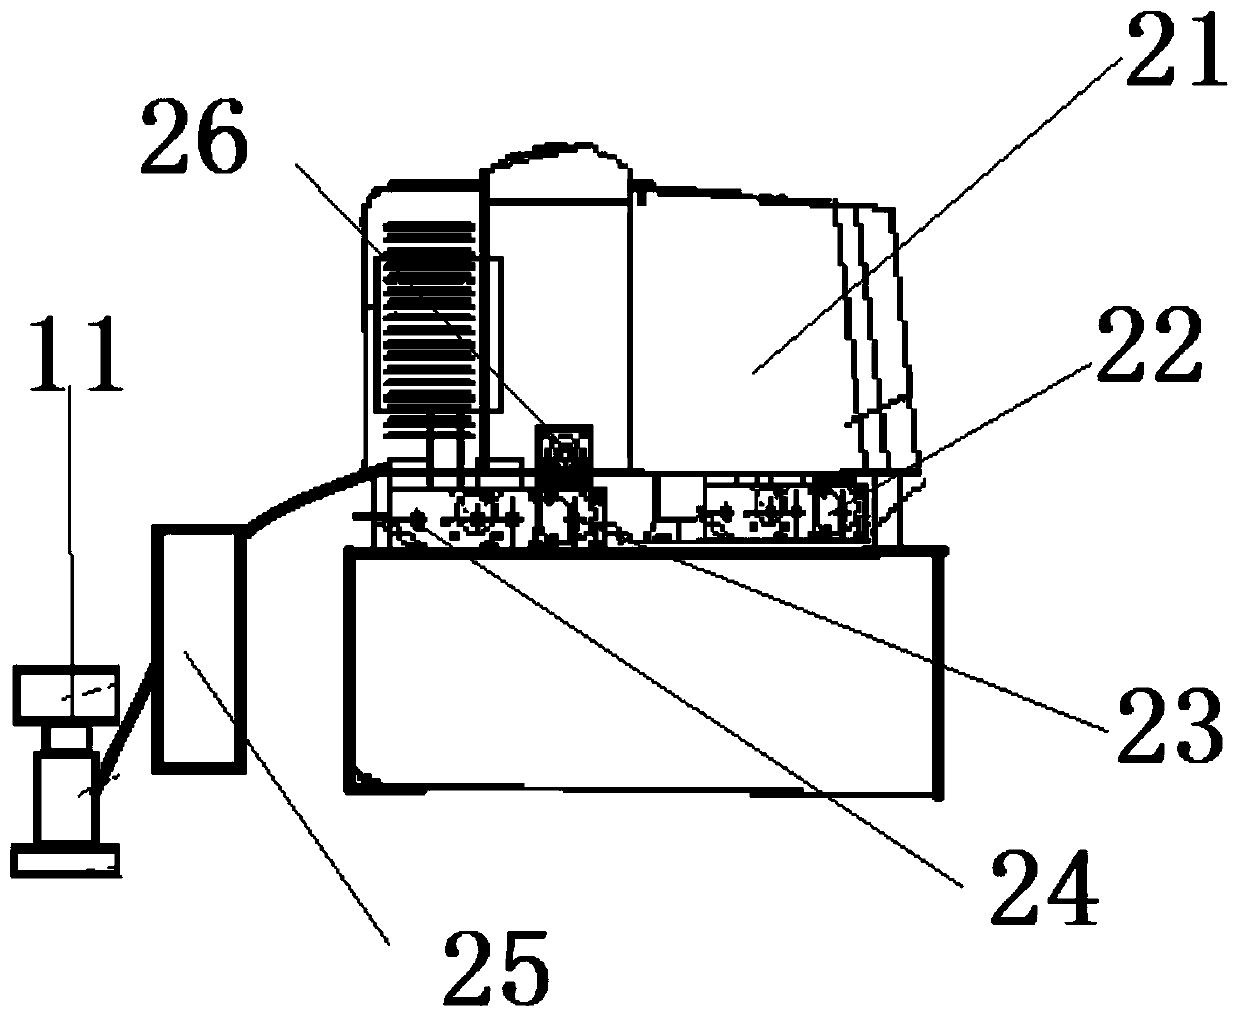 Synchronous jacking system for prefabricated box girder template